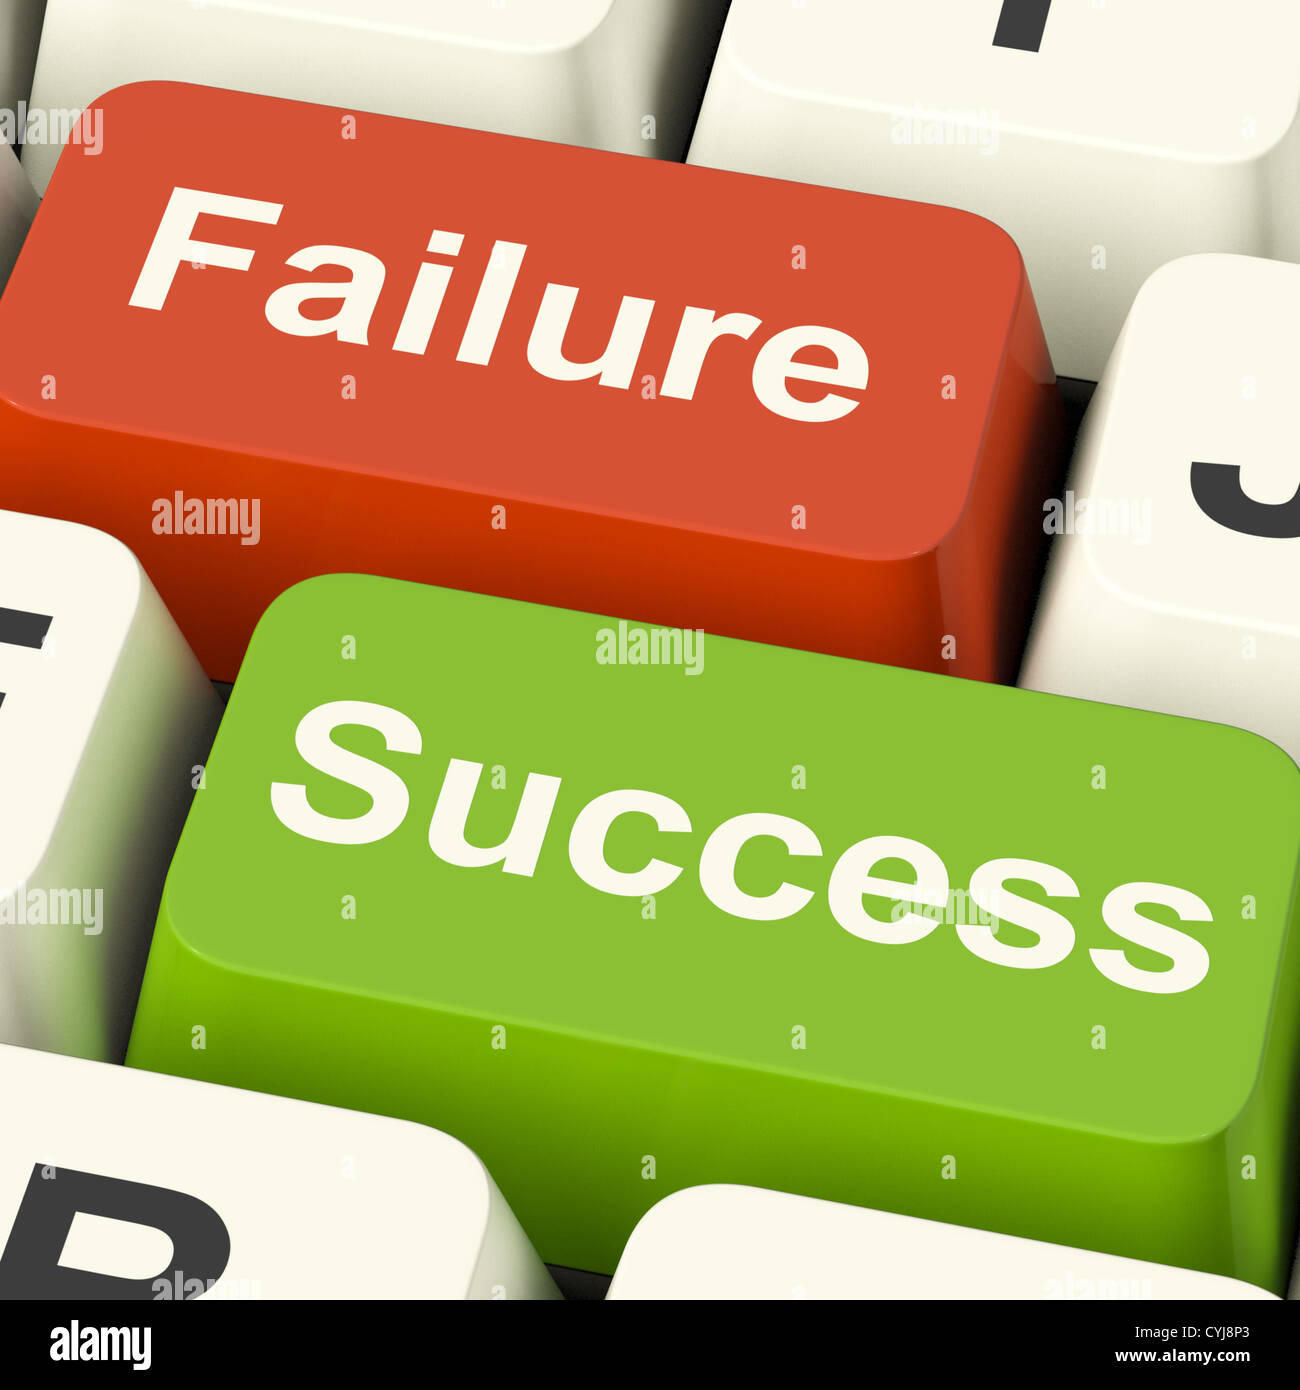 Success And Failure Computer Keys Shows Succeeding Or Failing Online Stock Photo